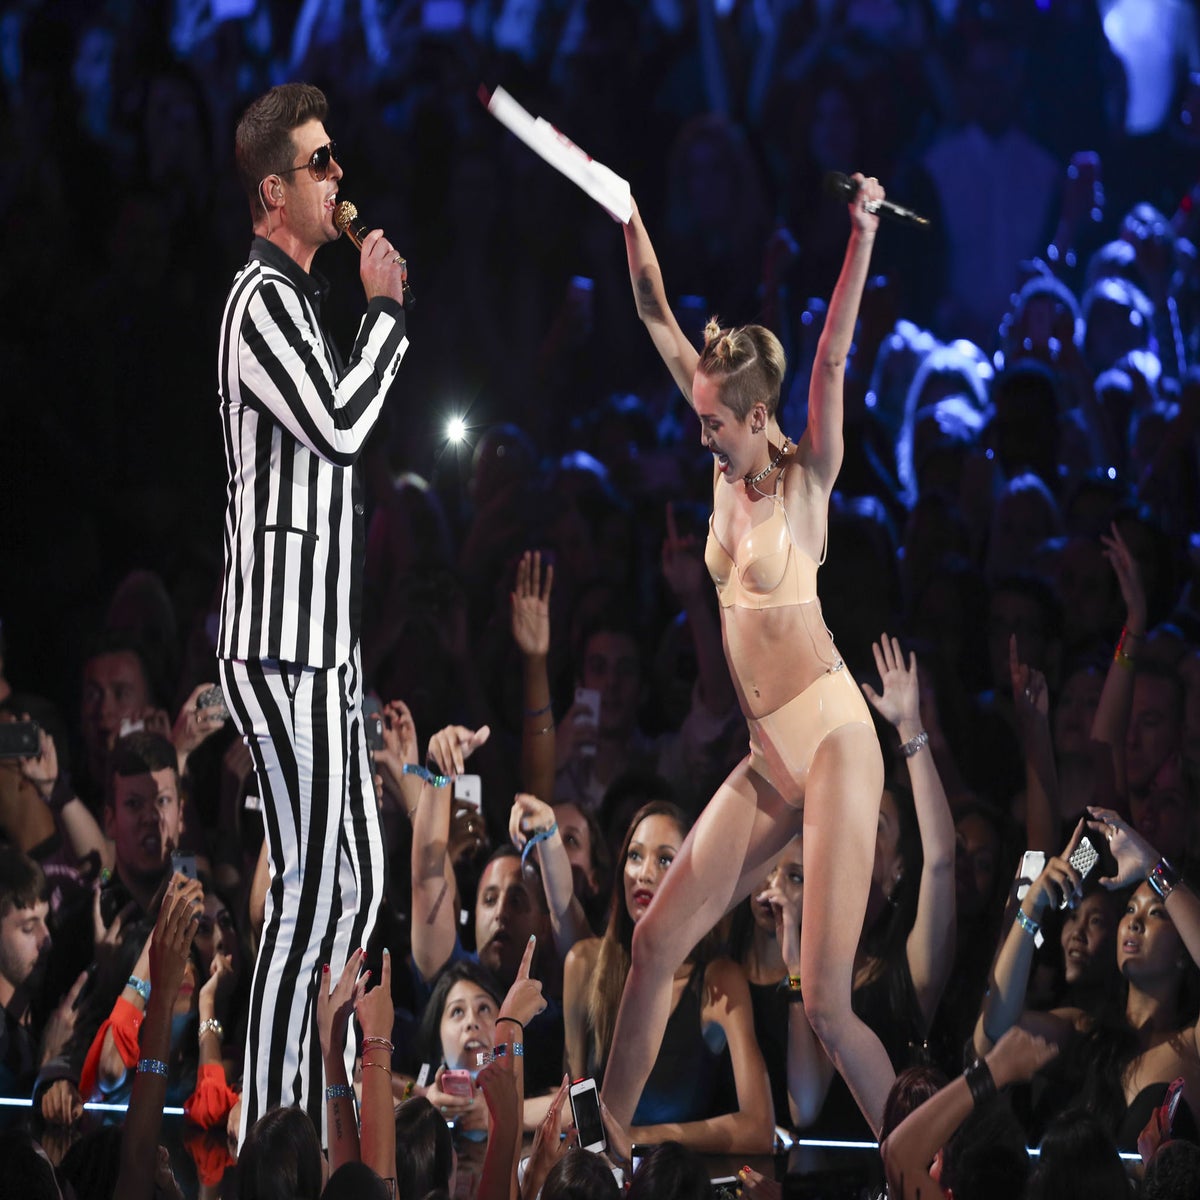 Miley Cirus - Miley Cyrus says Robin Thicke wanted her 'as naked as possible' at the  VMAs. I'm not surprised | The Independent | The Independent